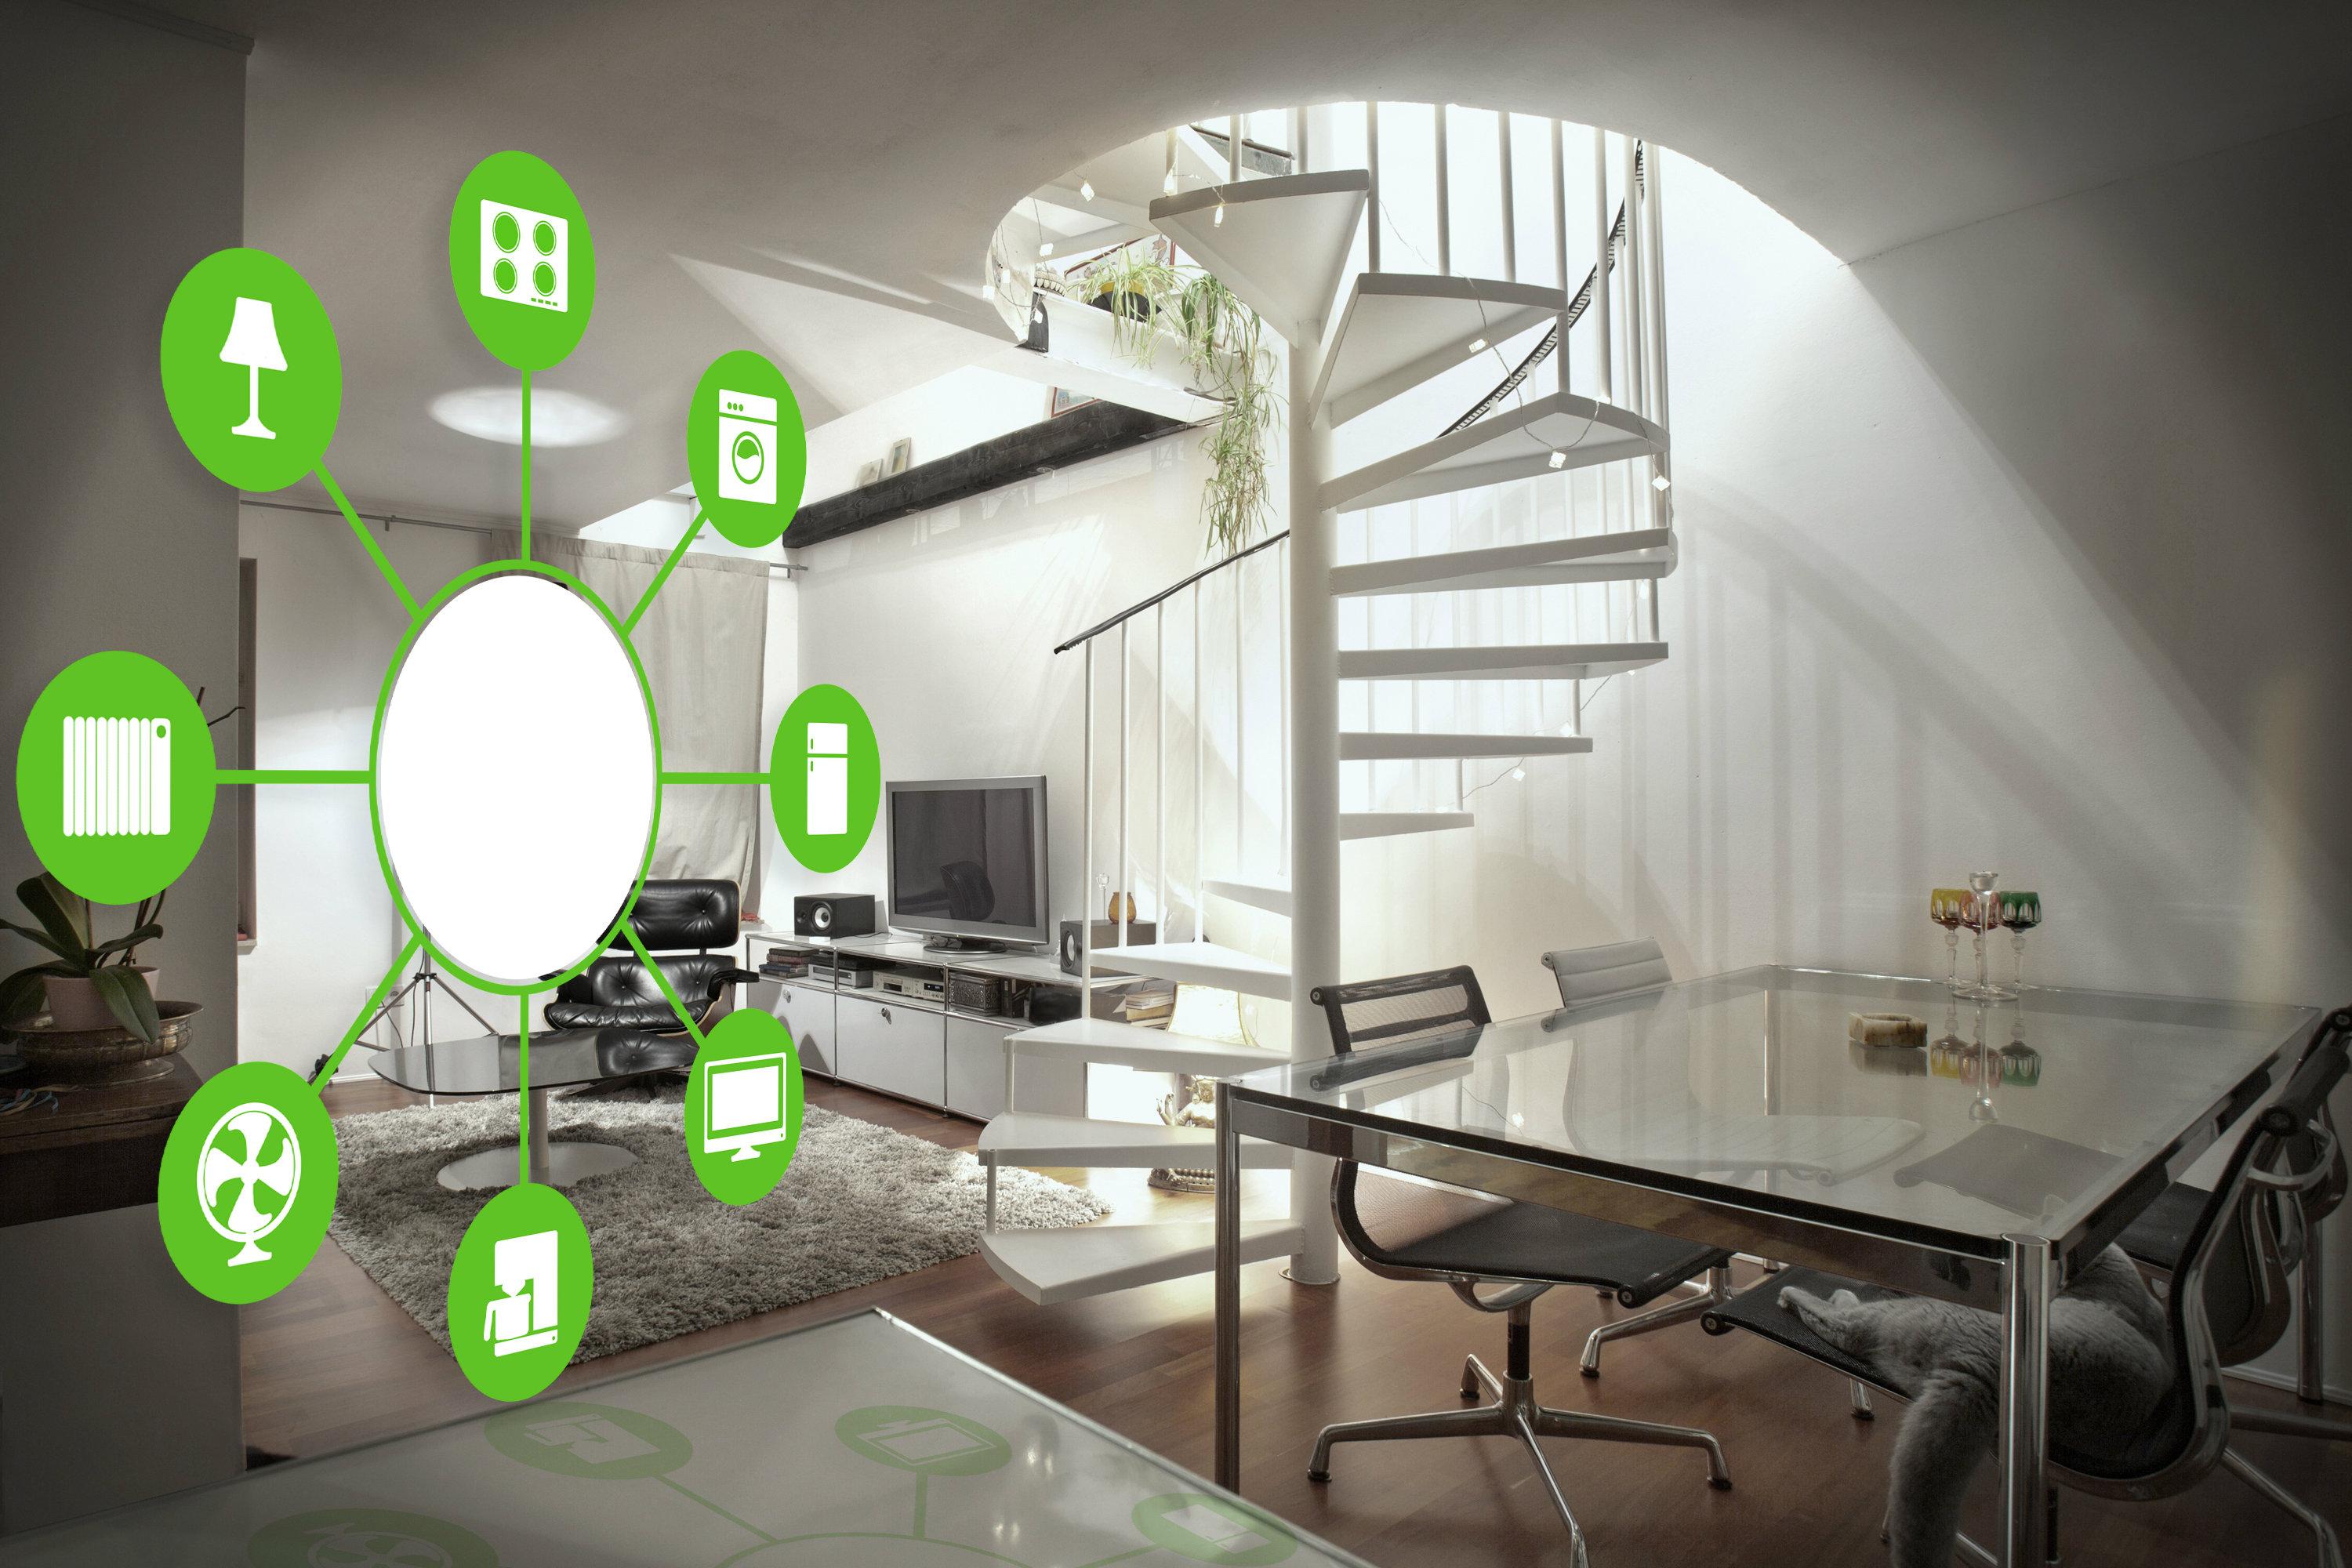 Smart Home, priority of the industry - Home Appliances World